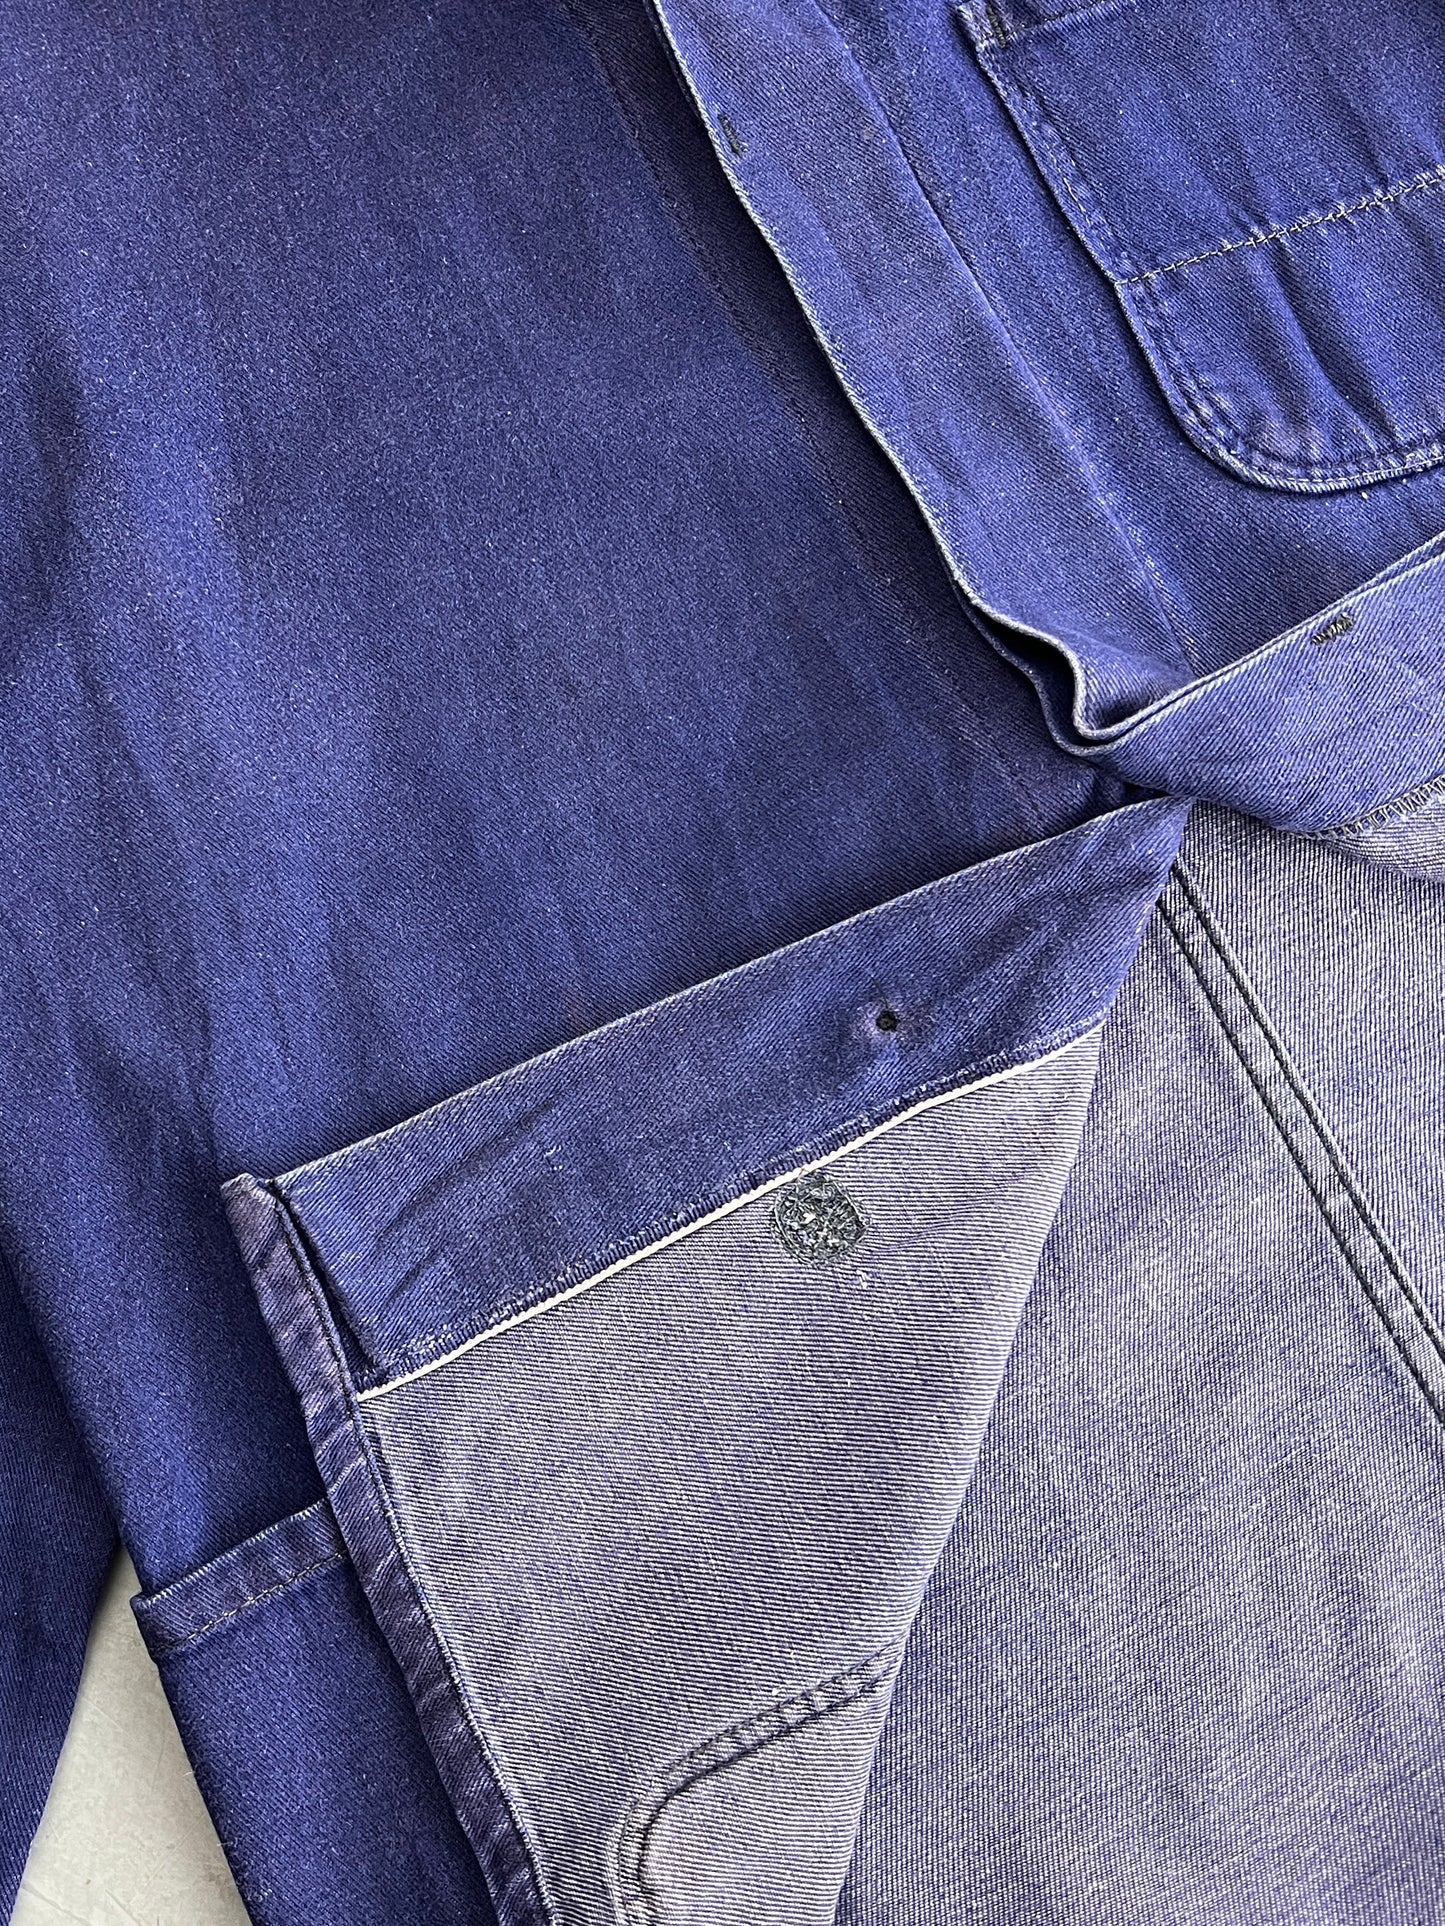 French Selvage Chore Jacket [L]